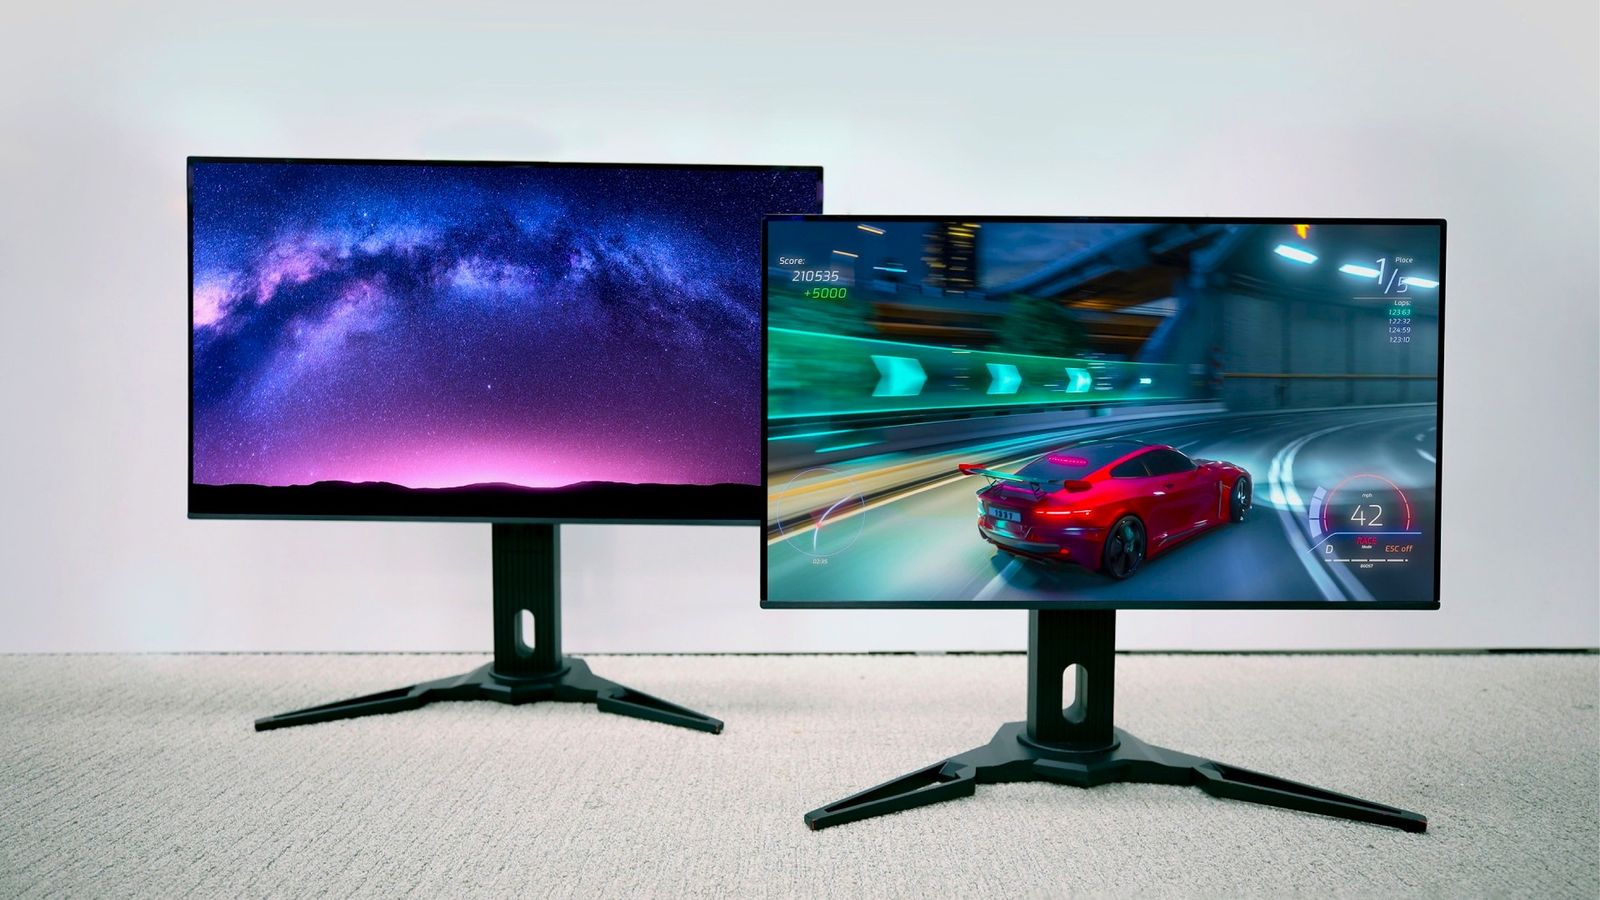 An image of two monitors that use the Samsung QD-OLED Gen 3 panel